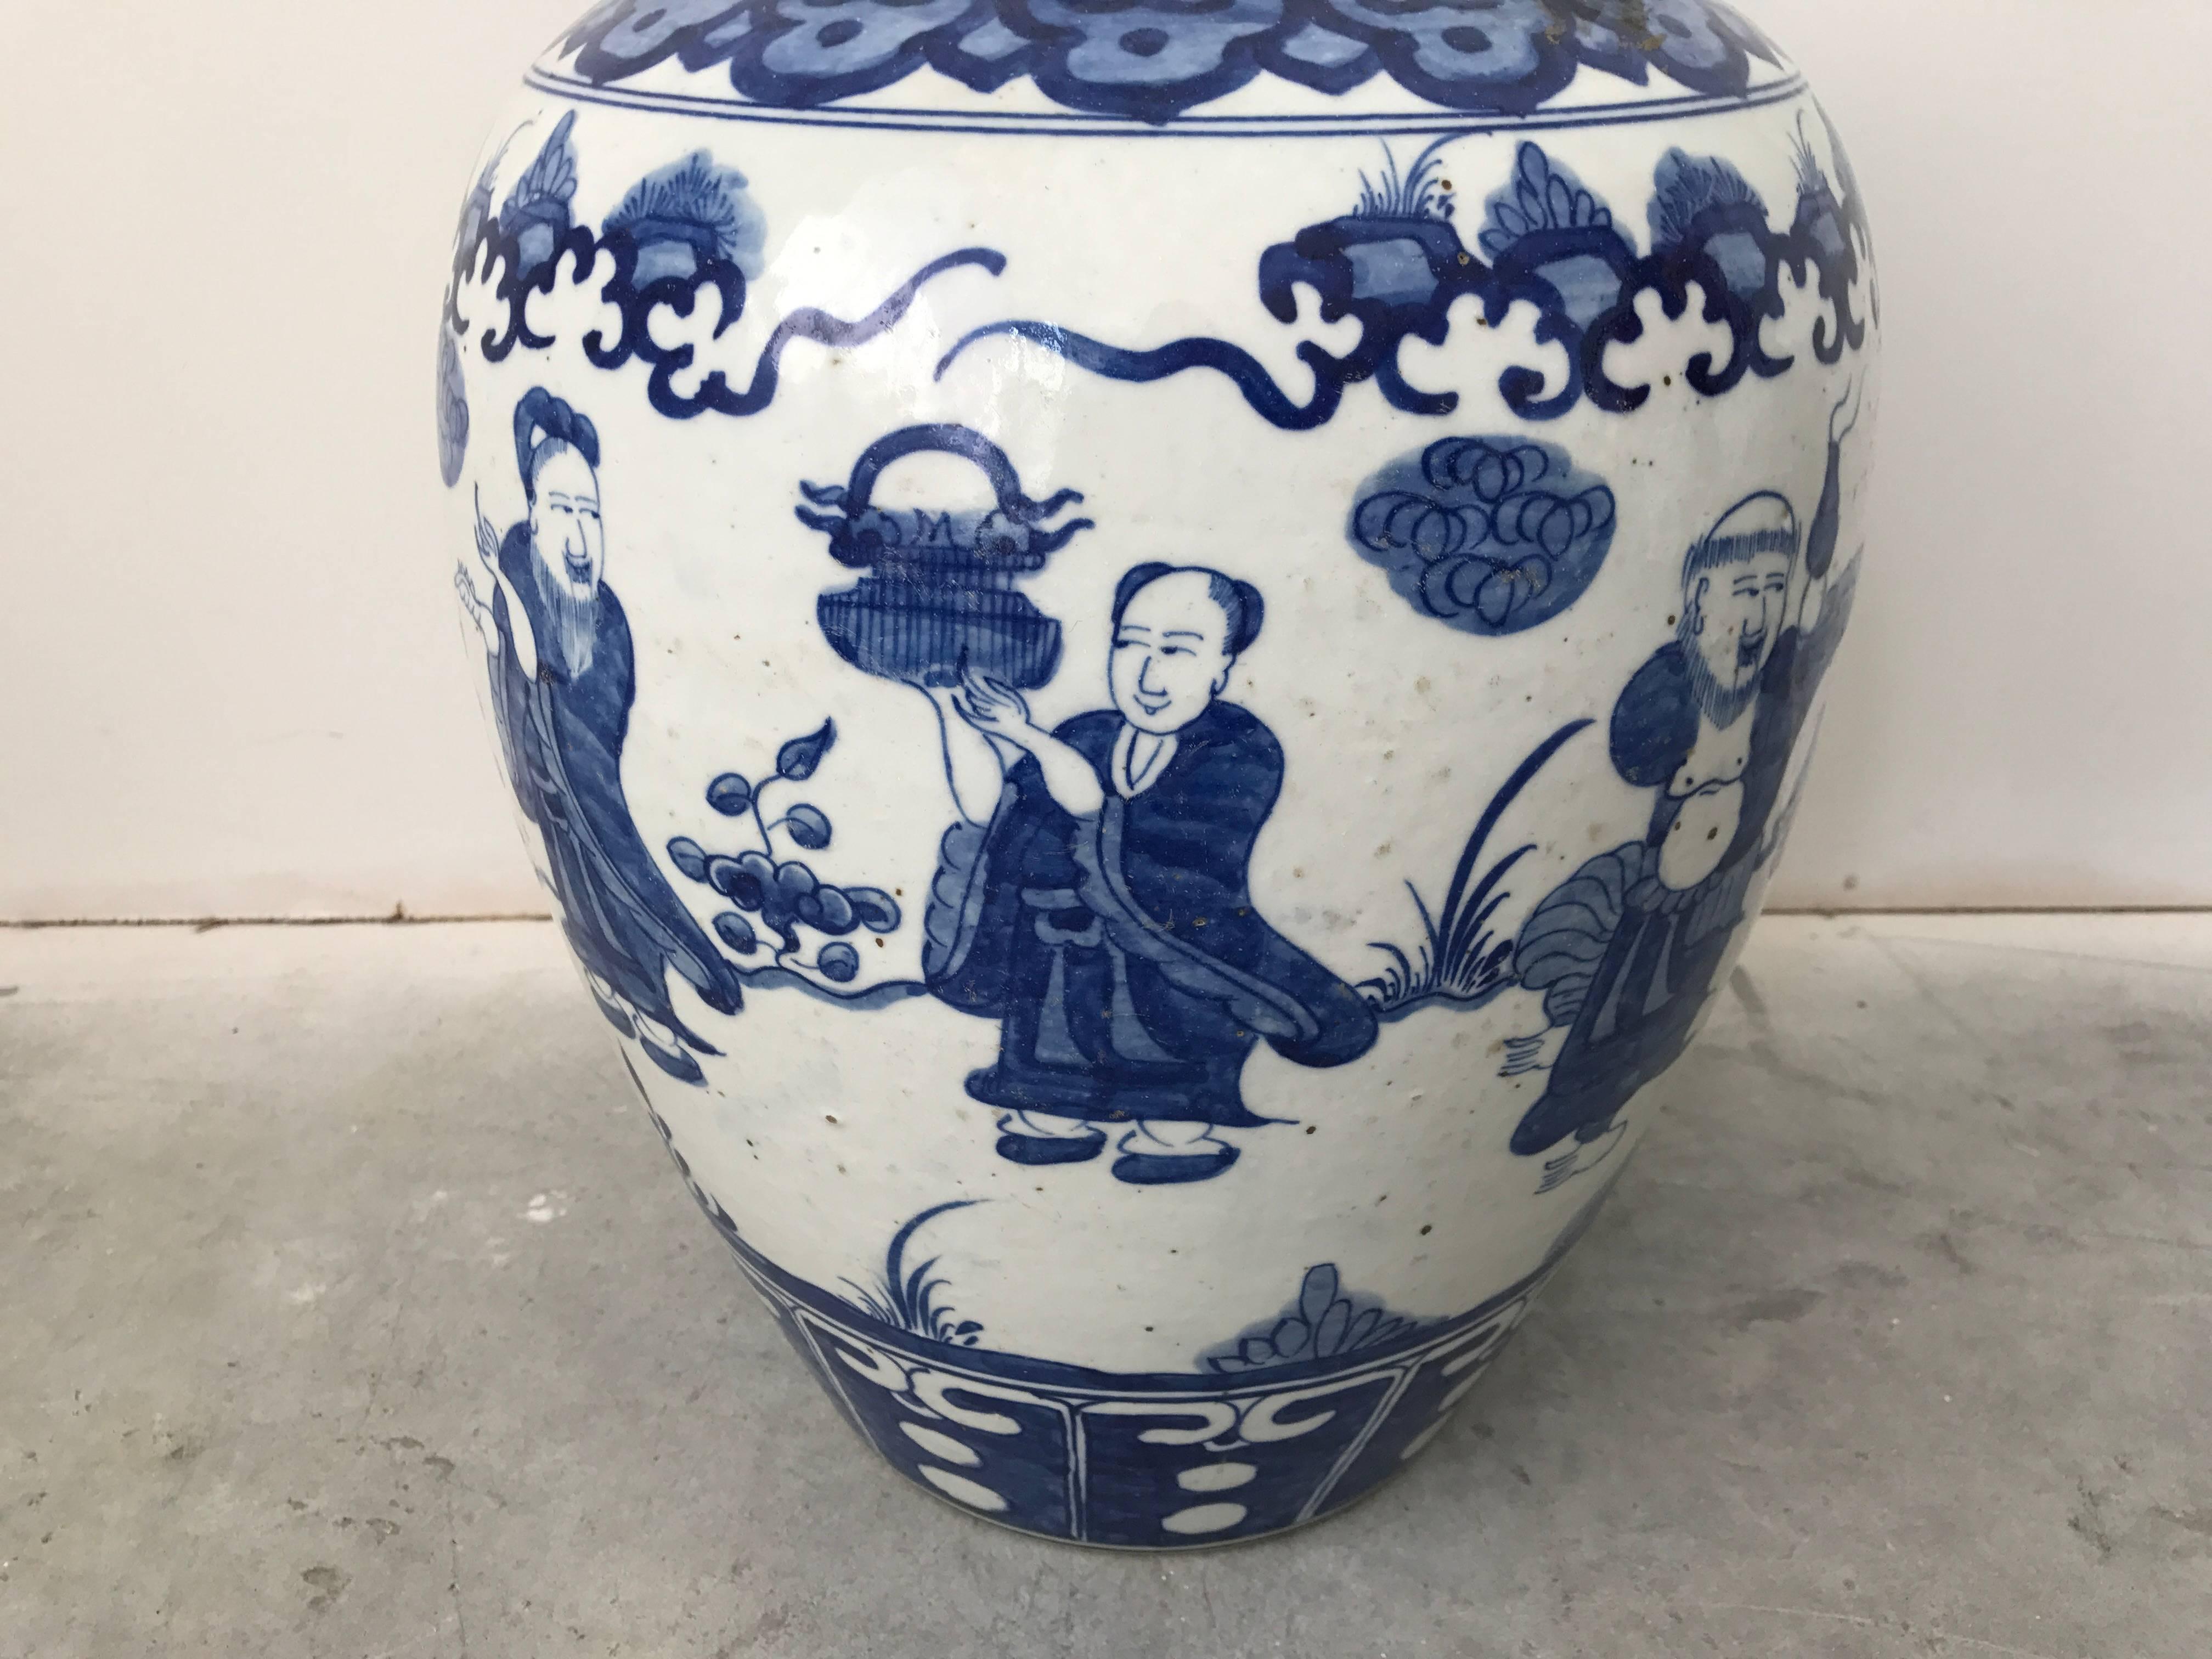 Offered is a stunning, large blue and white ginger jar urn with ornate scenery on all sides. Brass hook-handle on lid.